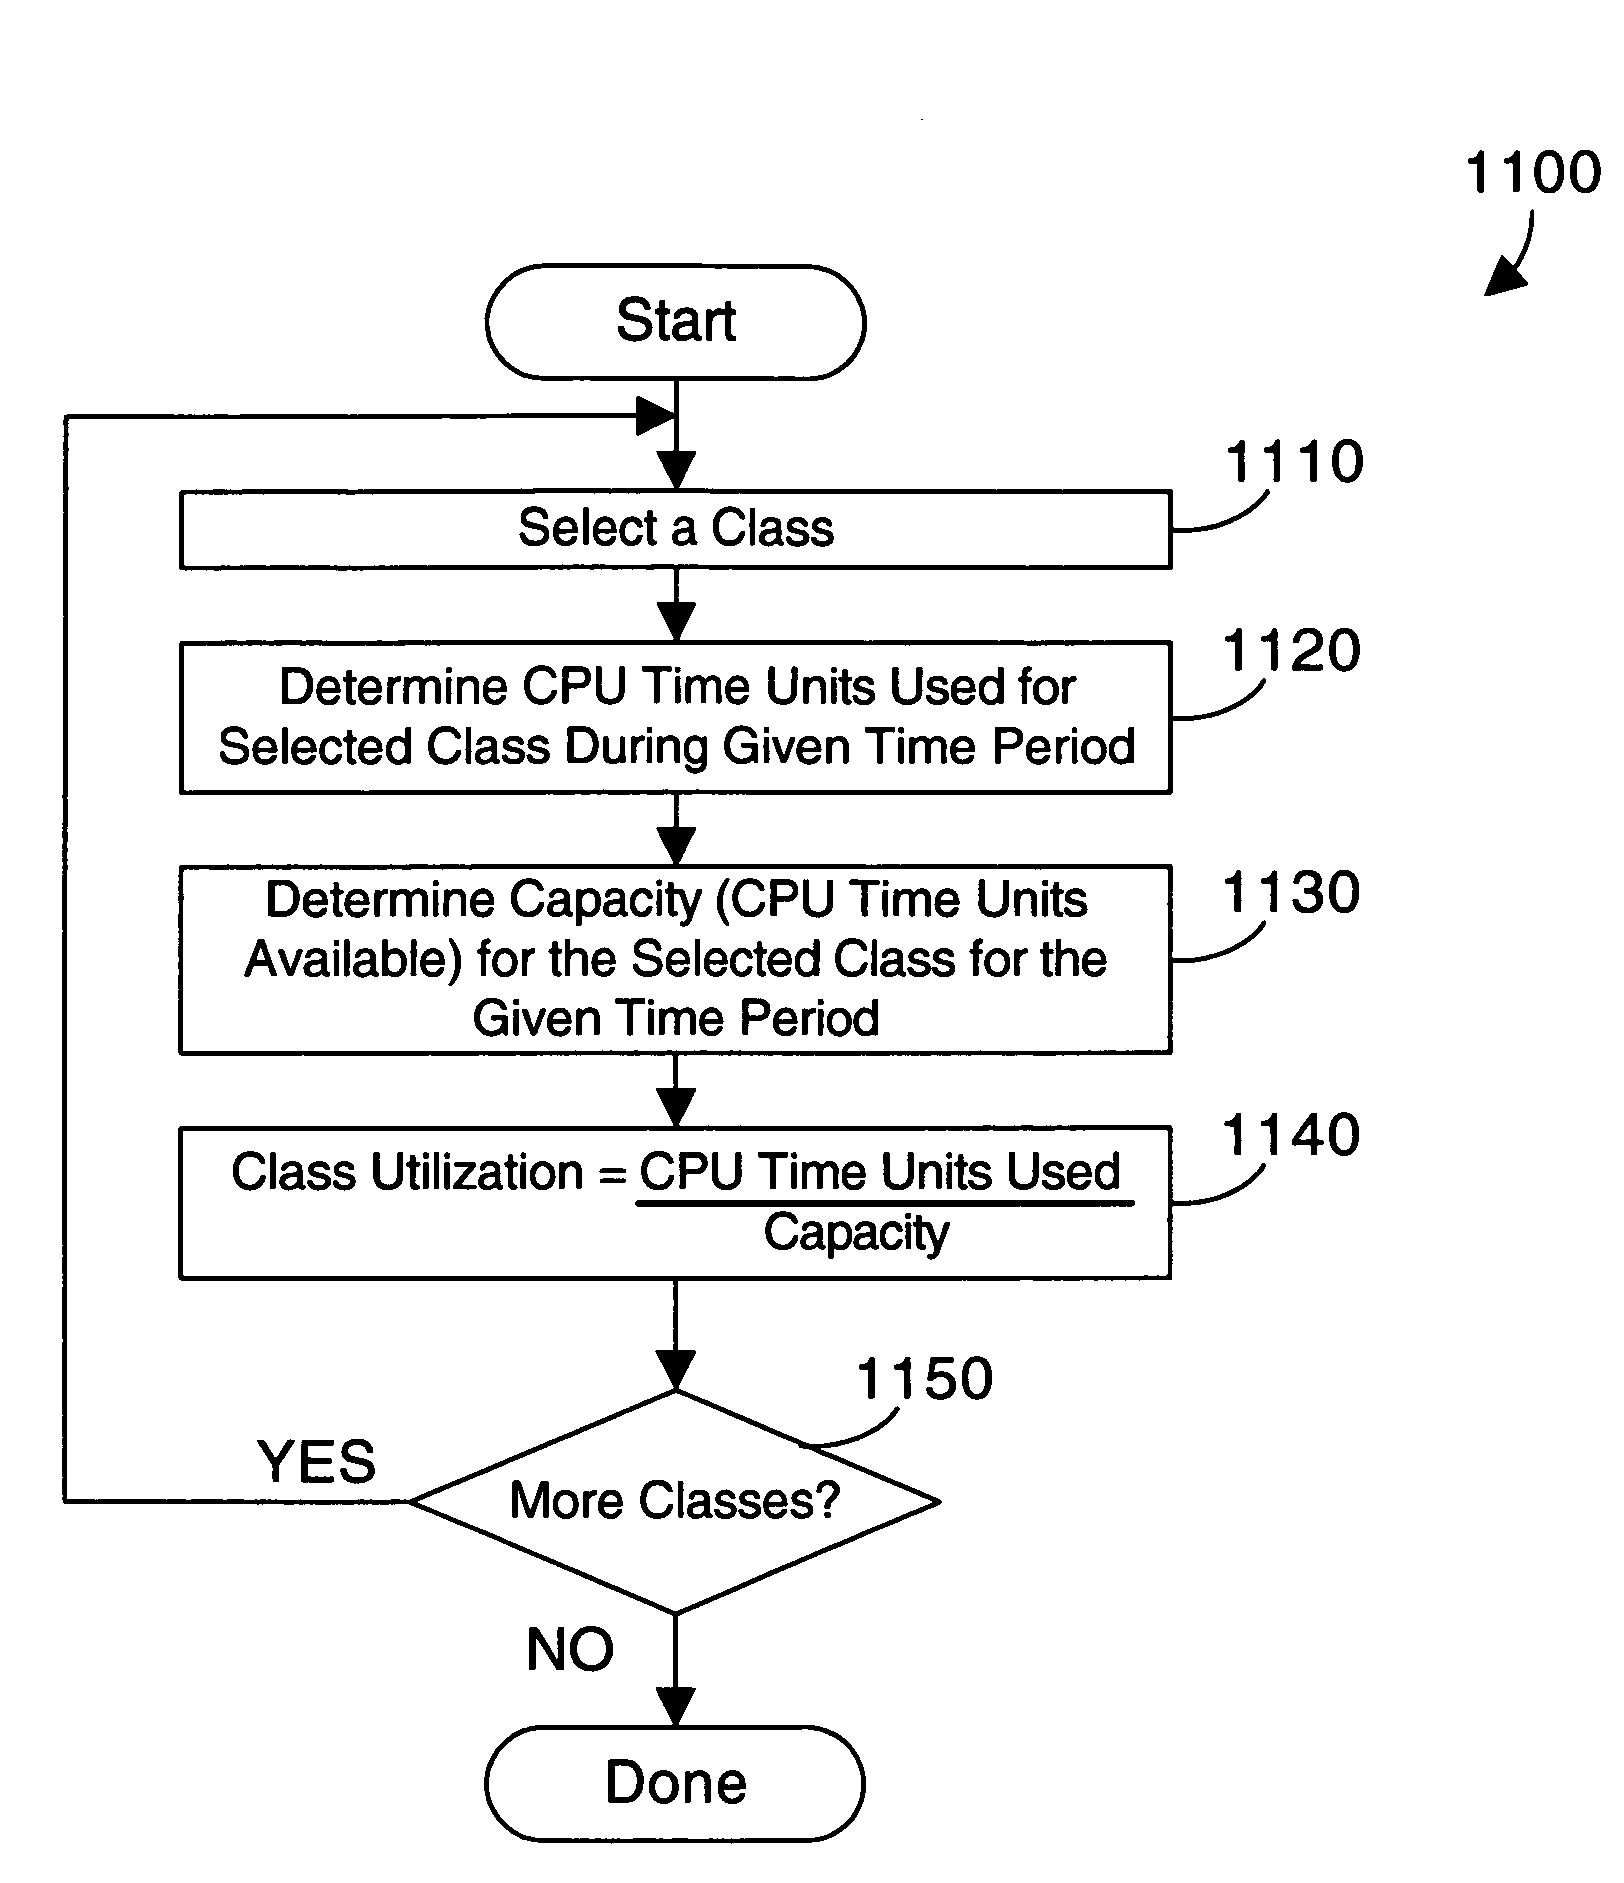 Apparatus and method for measuring and reporting processor capacity and processor usage in a computer system with processors of different speed and/or architecture